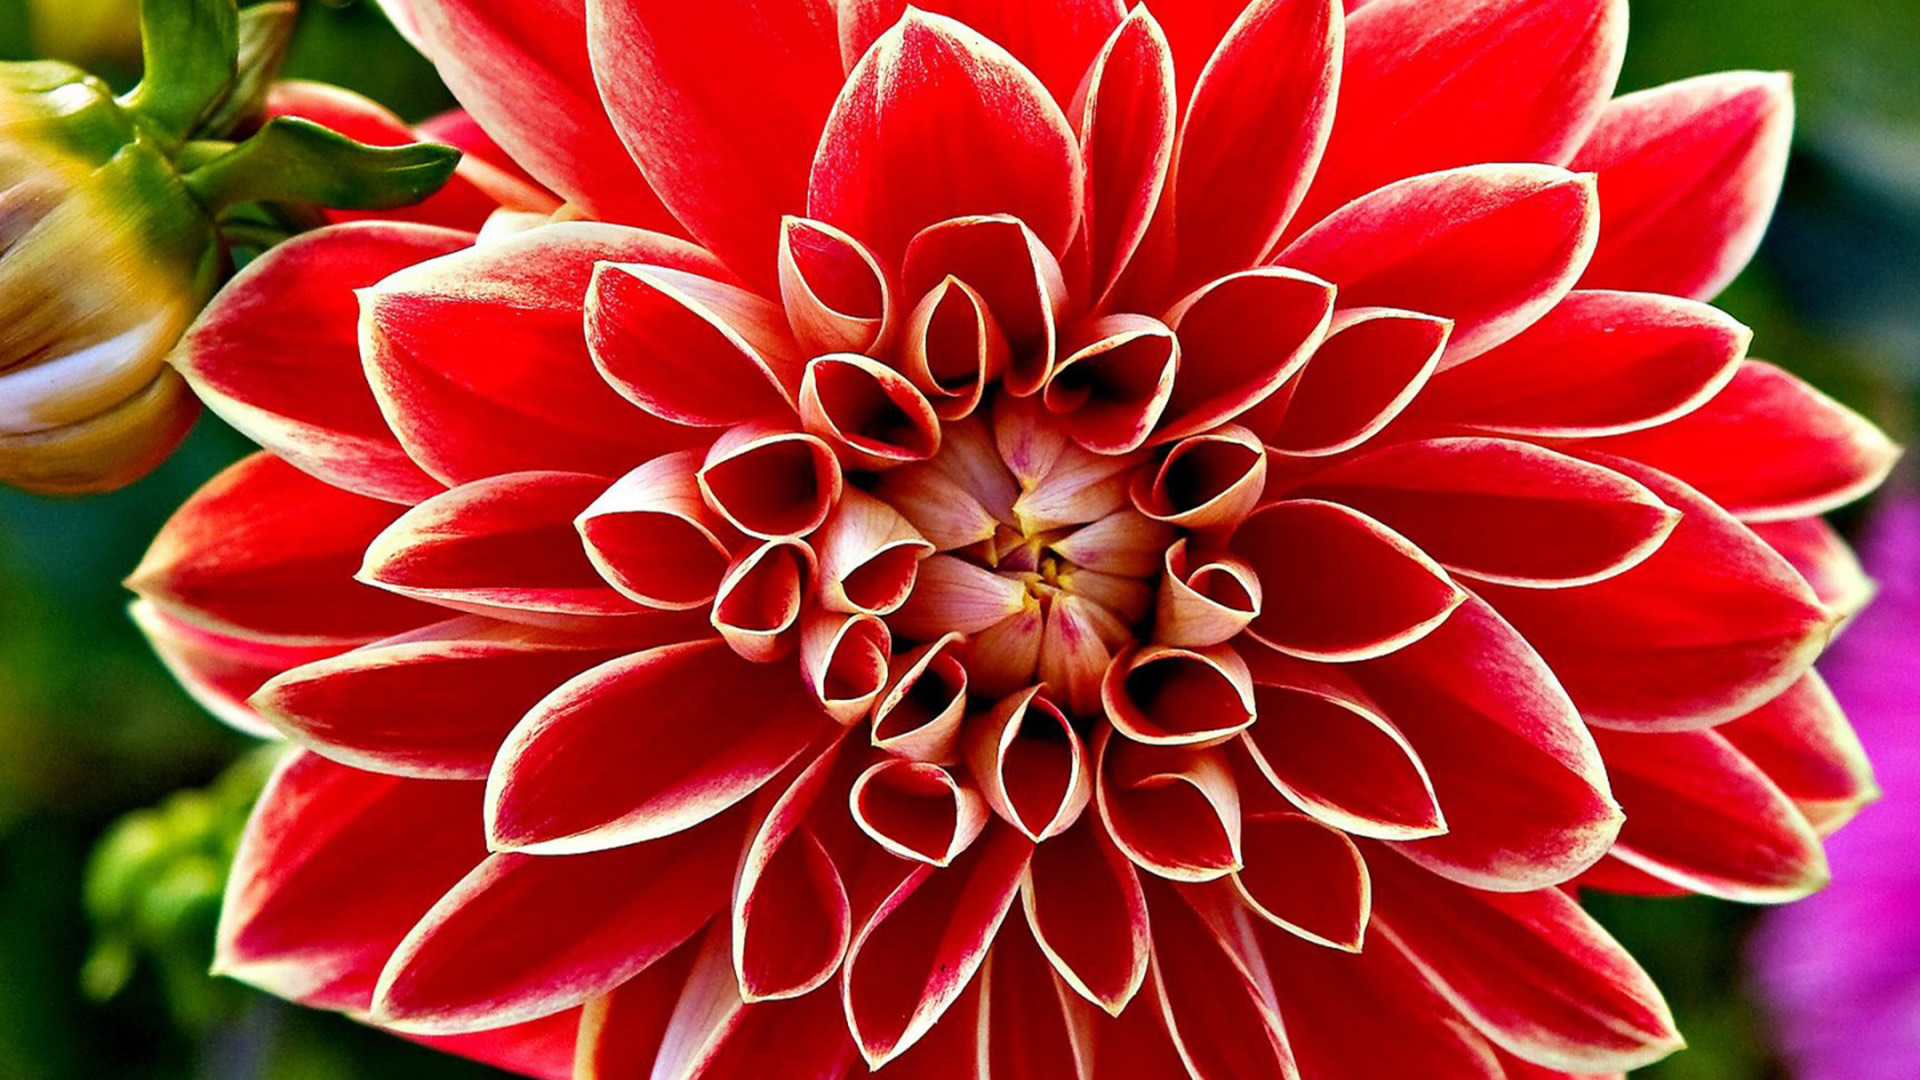 Red Flower Backgrounds